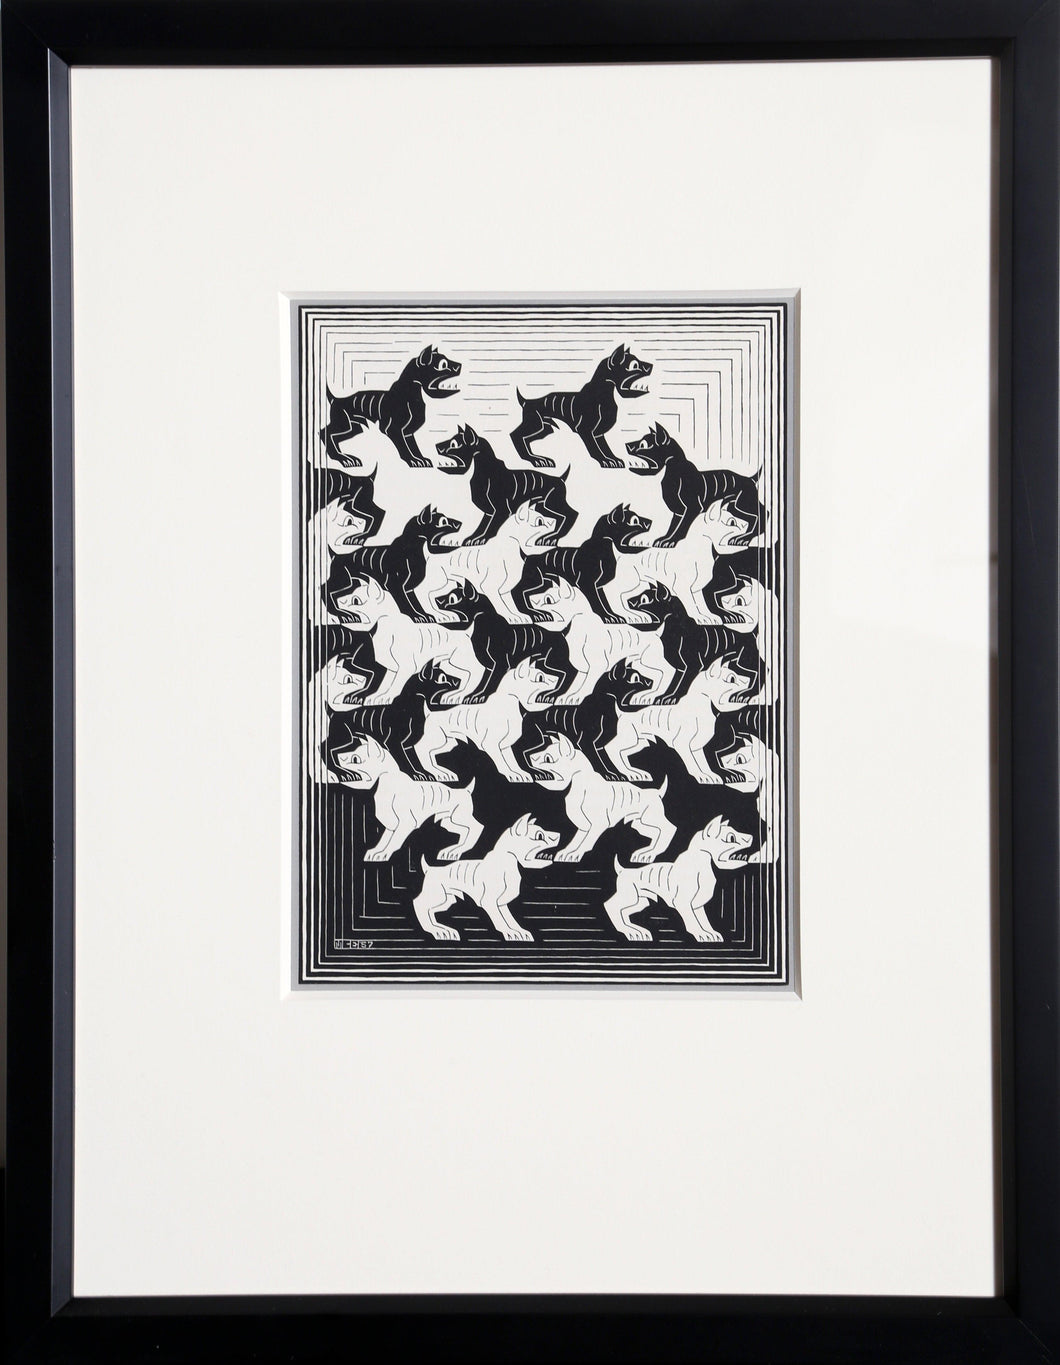 Dogs (Regular Division of the Plane) ref. B.419 Lithograph | M.C. (Maurits Cornelis) Escher,{{product.type}}